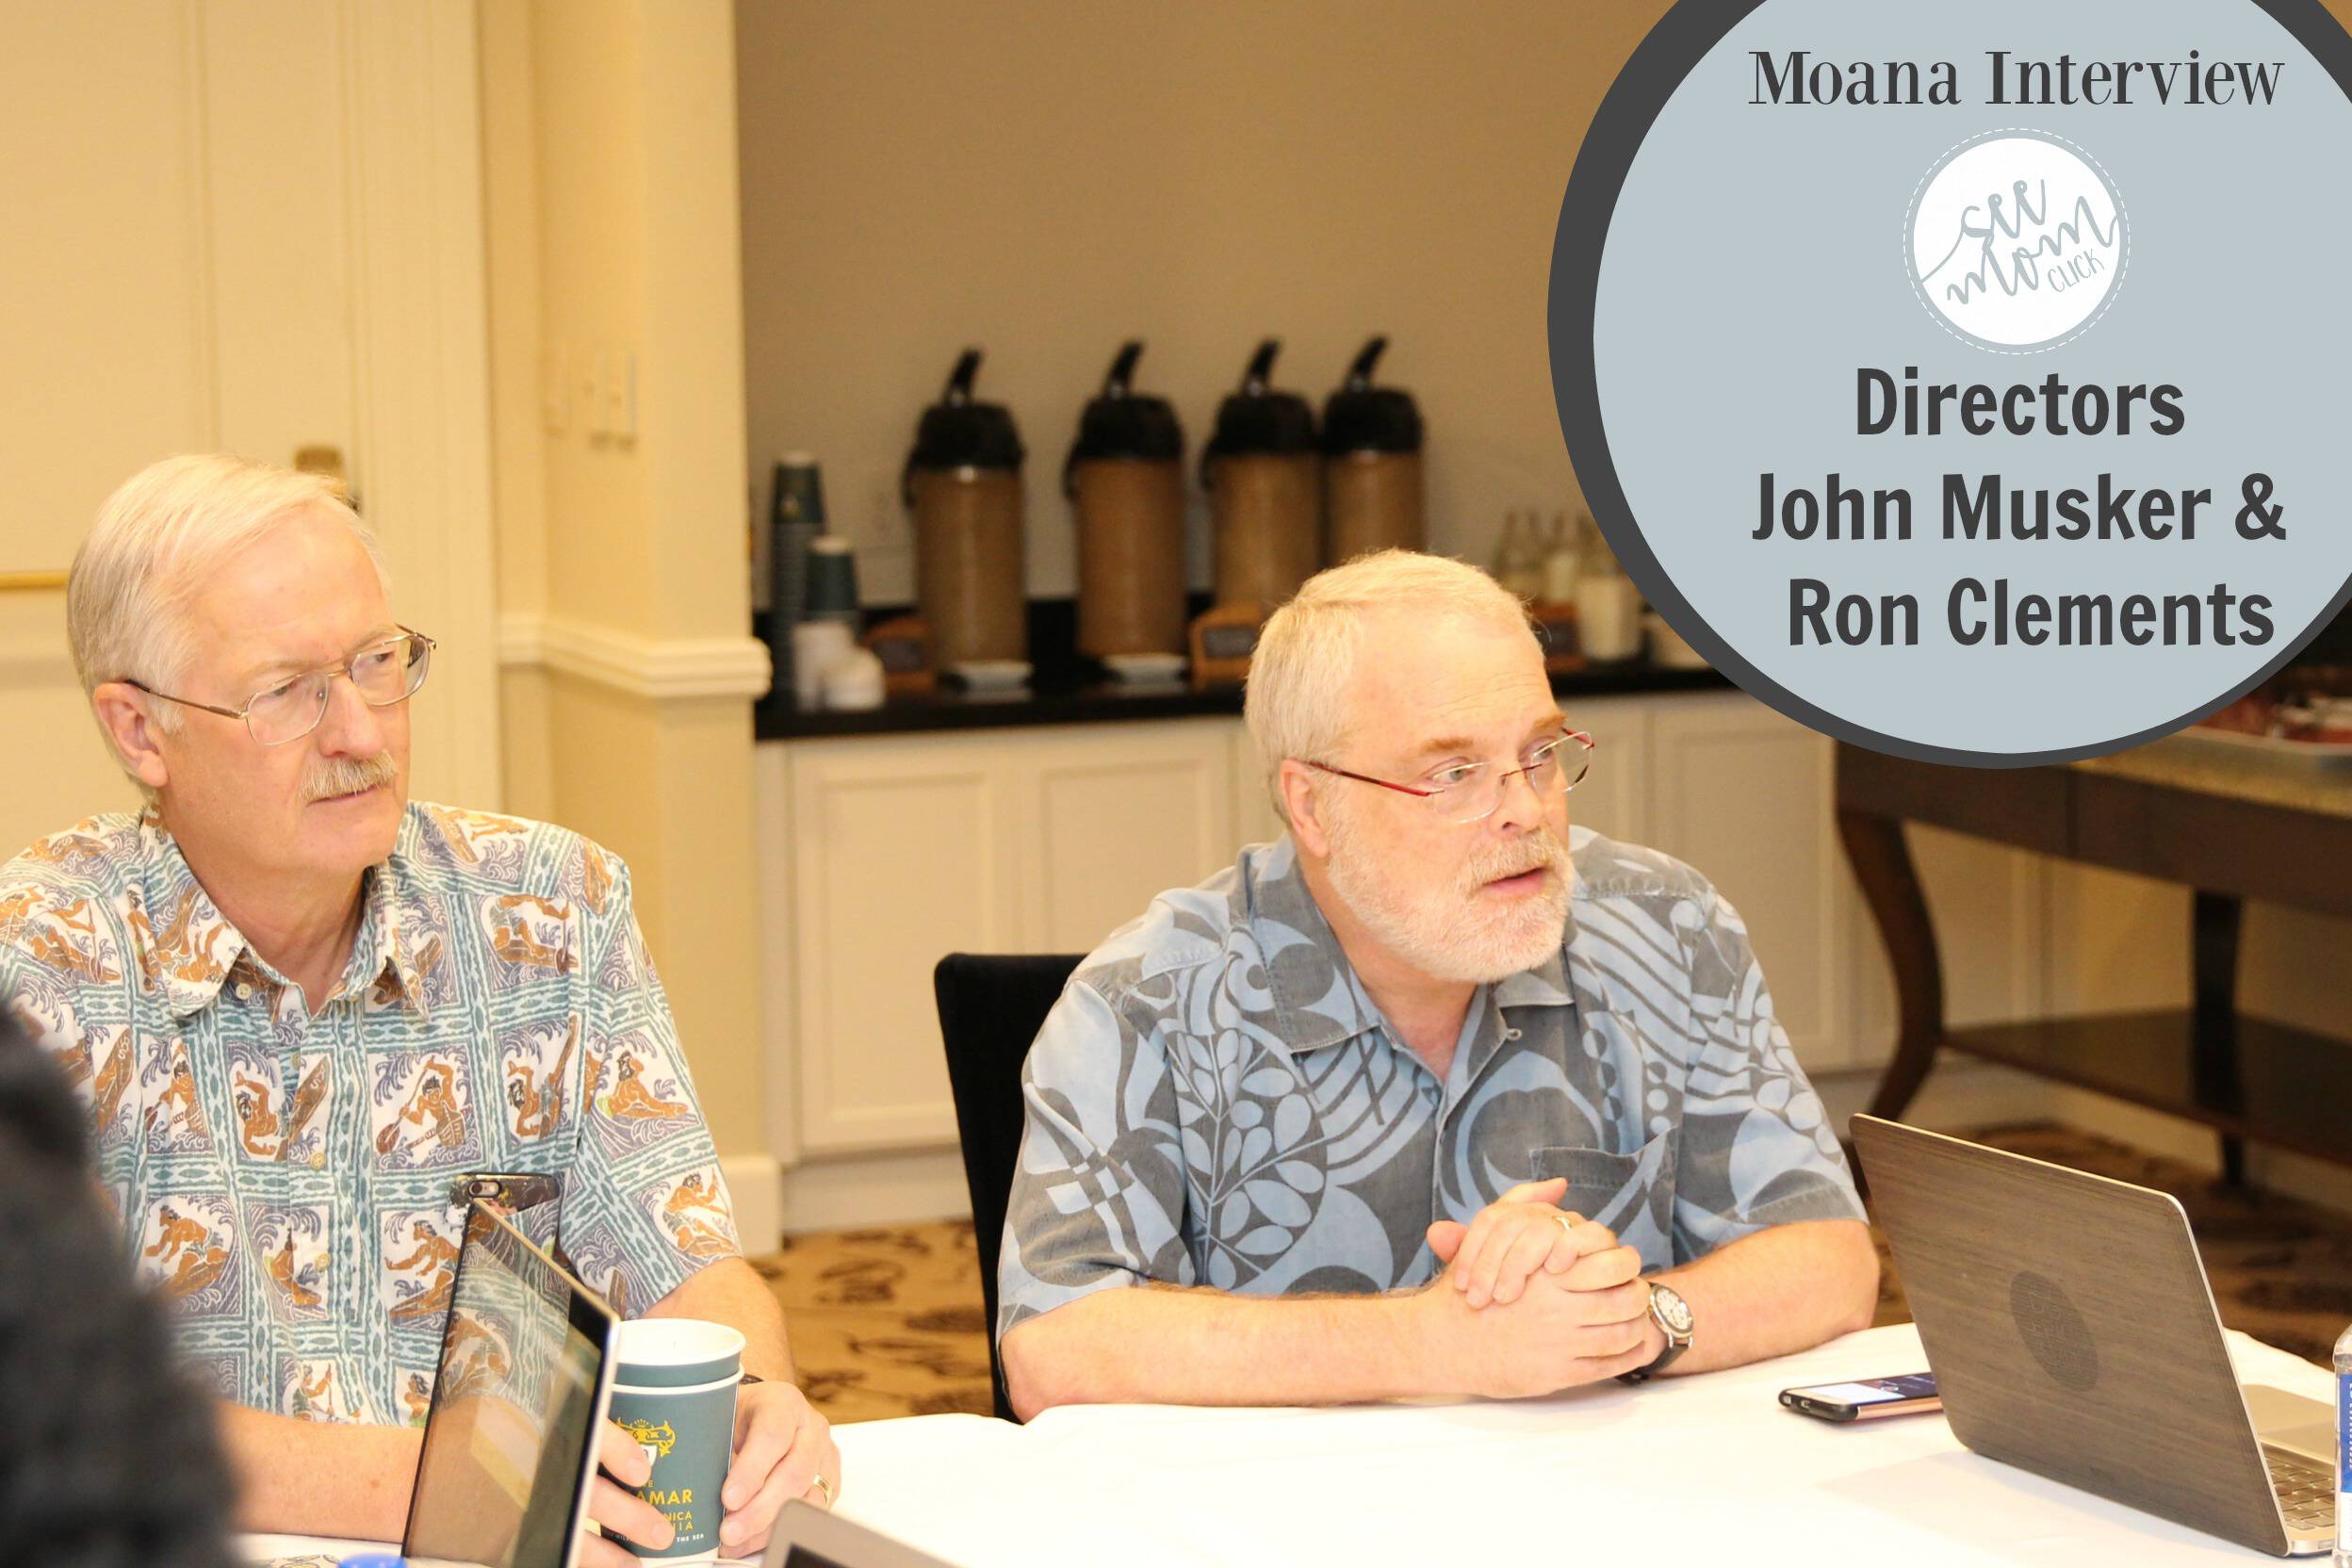 Talk about genius! Here is my exclusive MOANA interview with Directors John Musker and Ron Clements, These two know how to make a Disney movie!